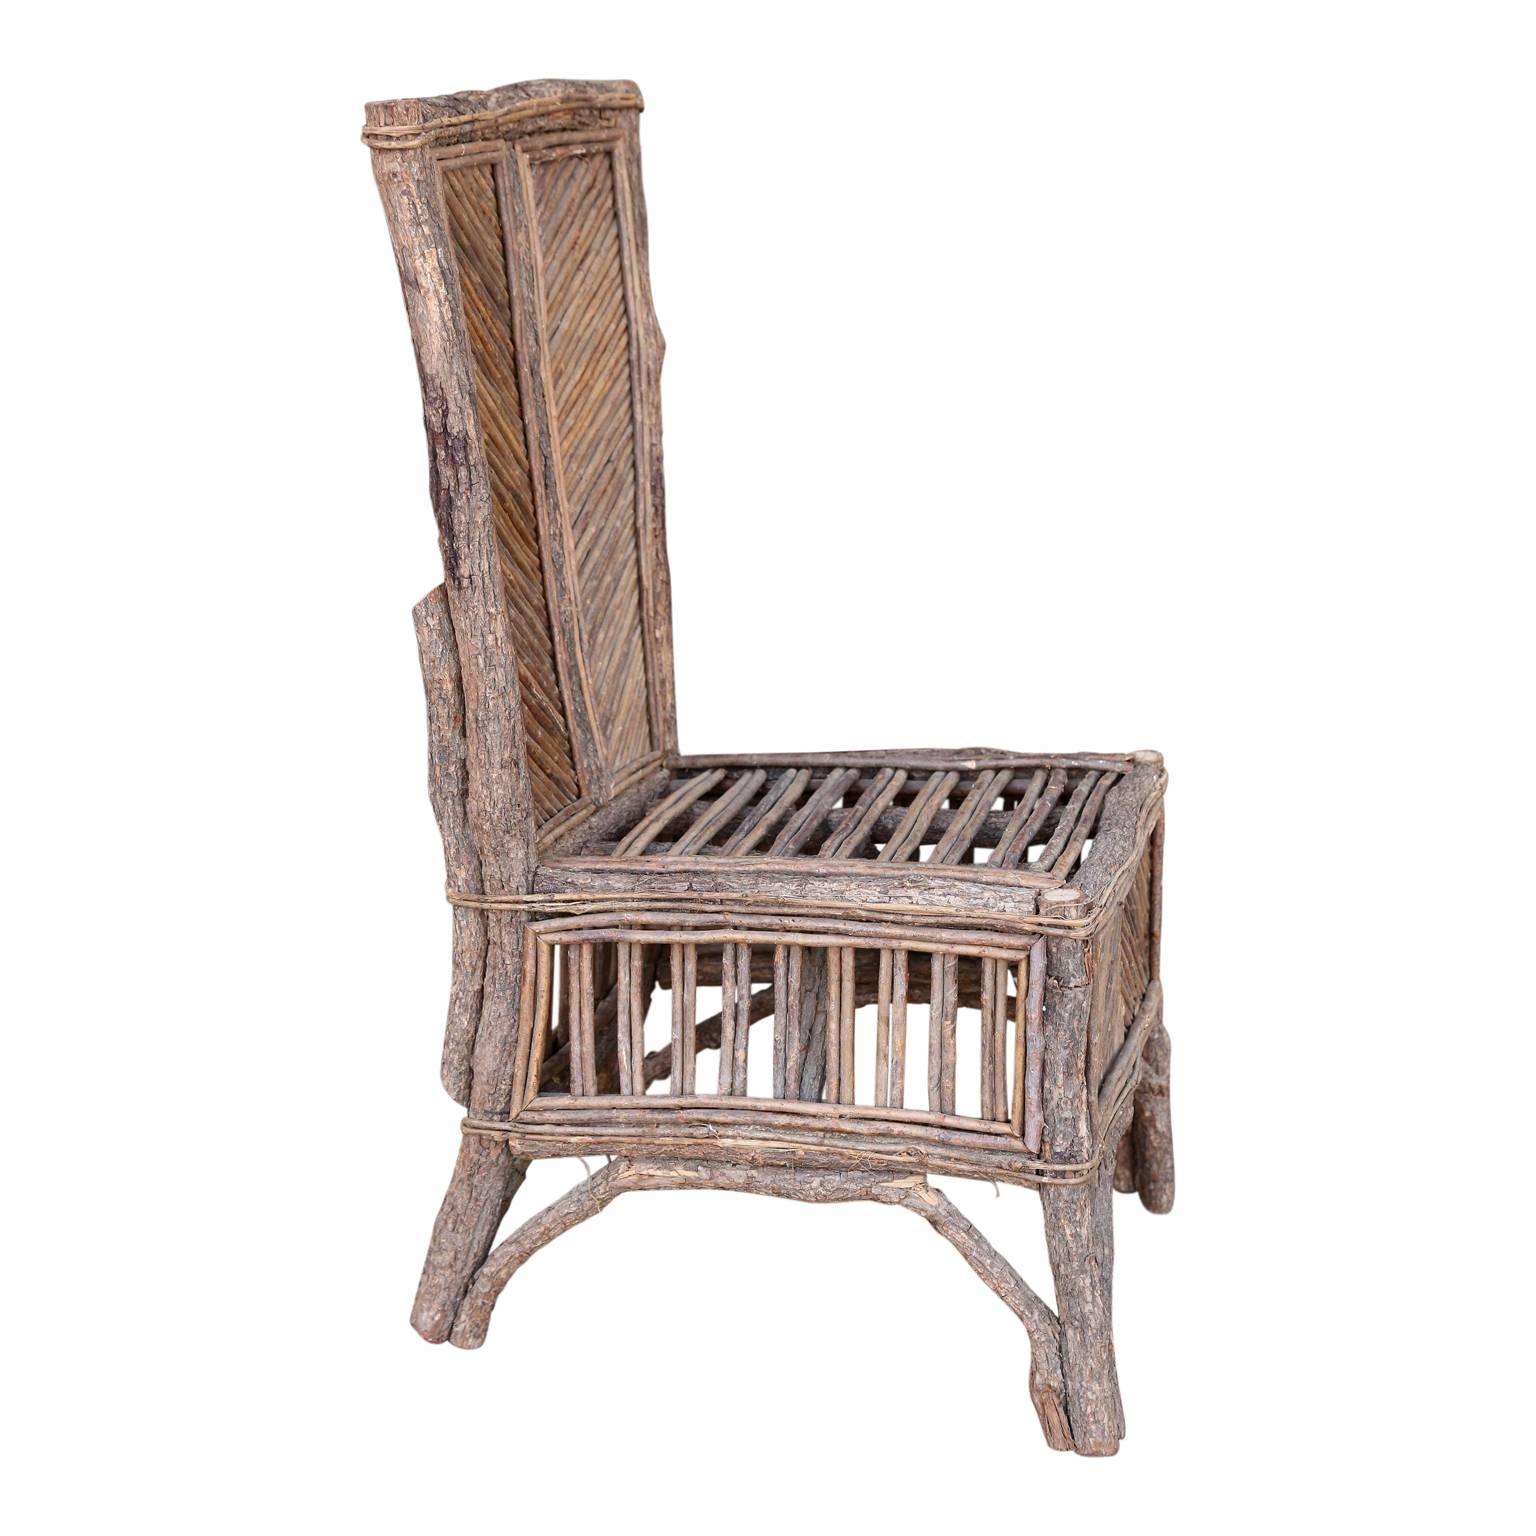 Vintage French Folk Art chair created from sticks, twigs and branches; very sturdy and decorative.